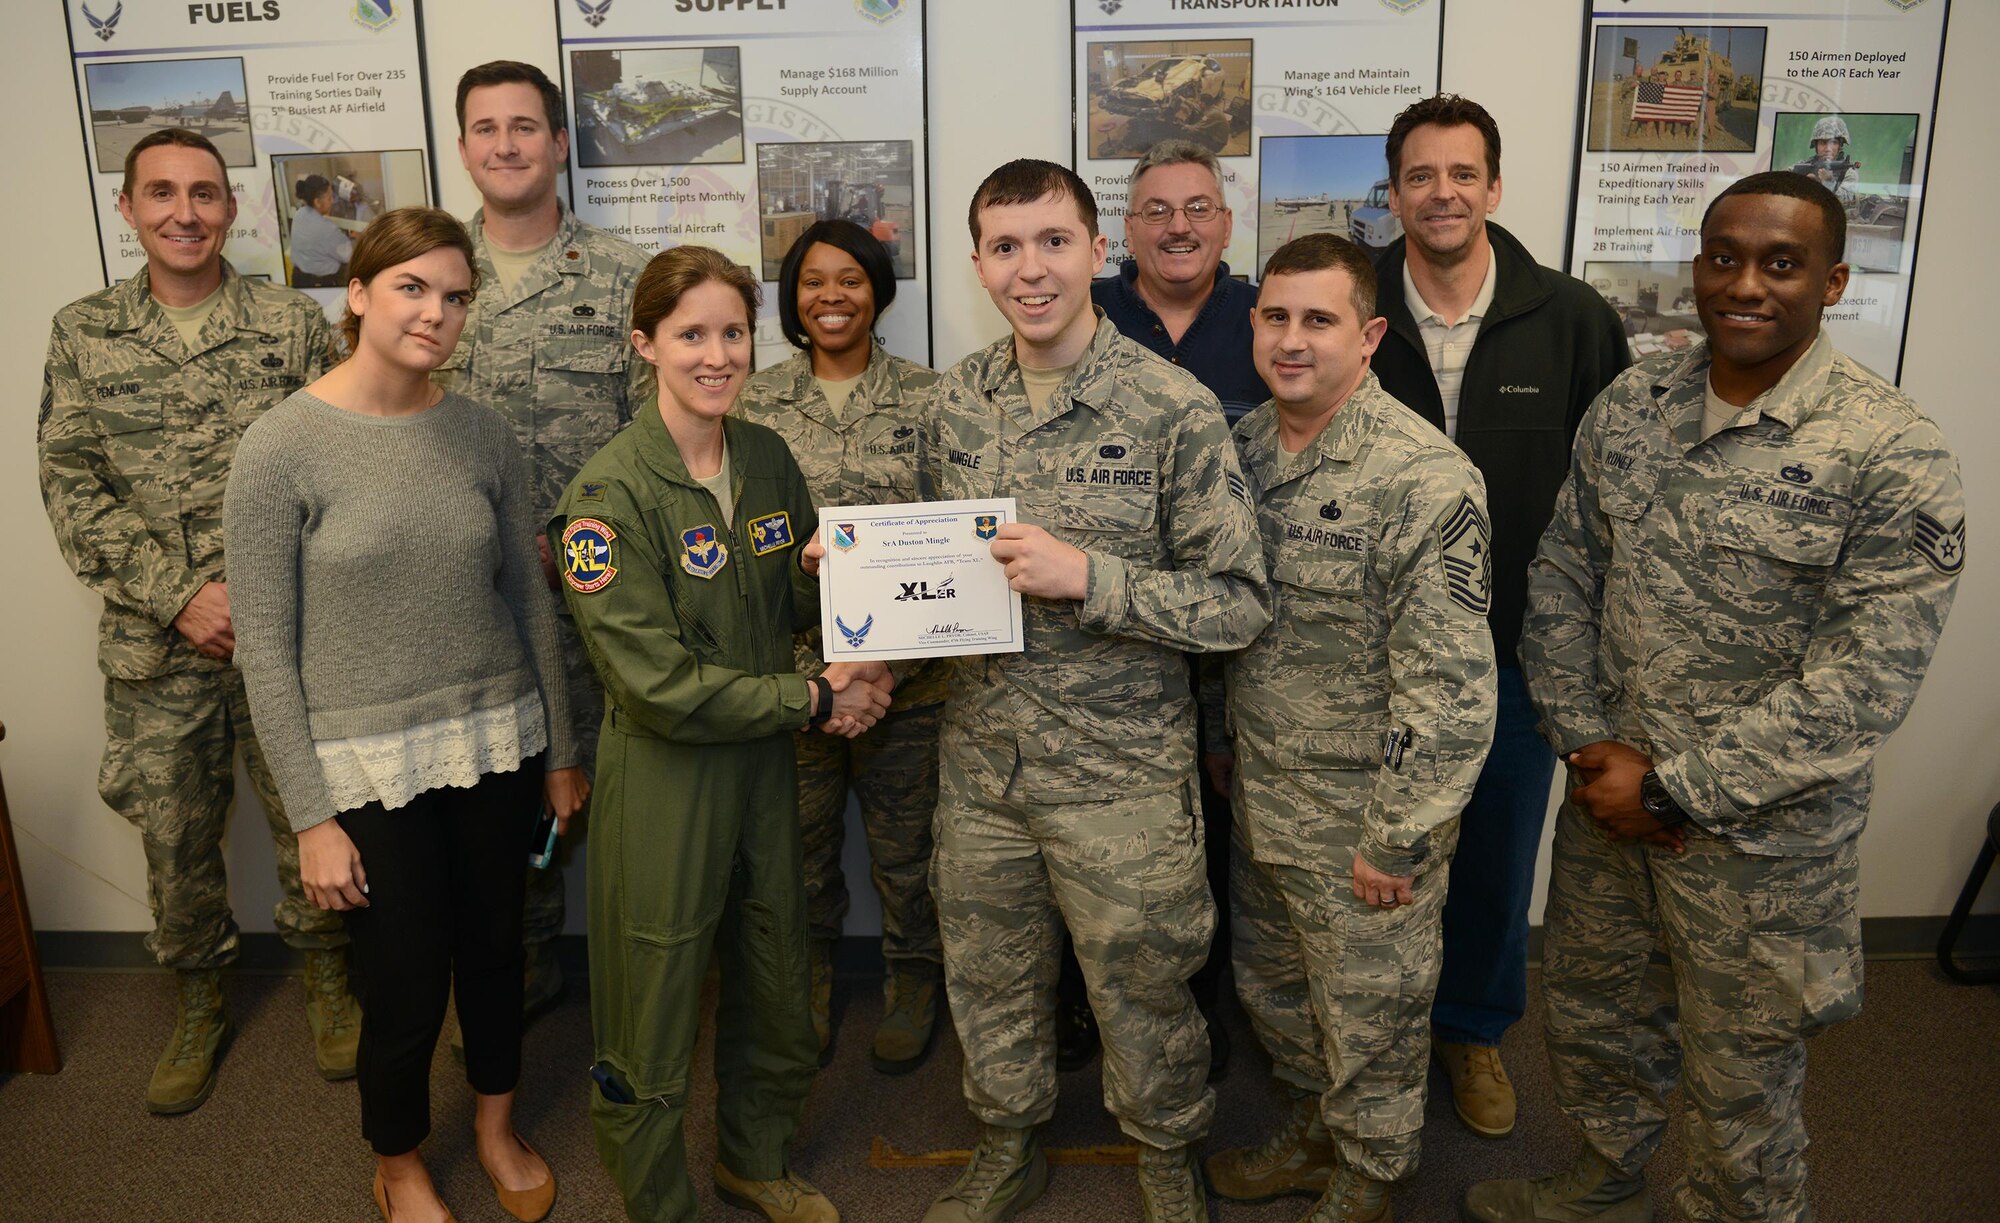 Senior Airman Duston Mingle, 47th Logistics Readiness Flight Squadron logistics planner (front center), accepts the “XLer of the Week” award from Col. Michelle Pryor (front left), 47th Flying Training Wing vice commander, and Chief Master Sgt. George Richey, 47th FTW command chief (front right), on Laughlin Air Force Base, Texas, Dec. 7, 2016. The XLer is a weekly award chosen by wing leadership and is presented to those who consistently make outstanding contributions to their unit and Laughlin. (U.S. Air Force photo/Airman 1st Class Benjamin N. Valmoja)